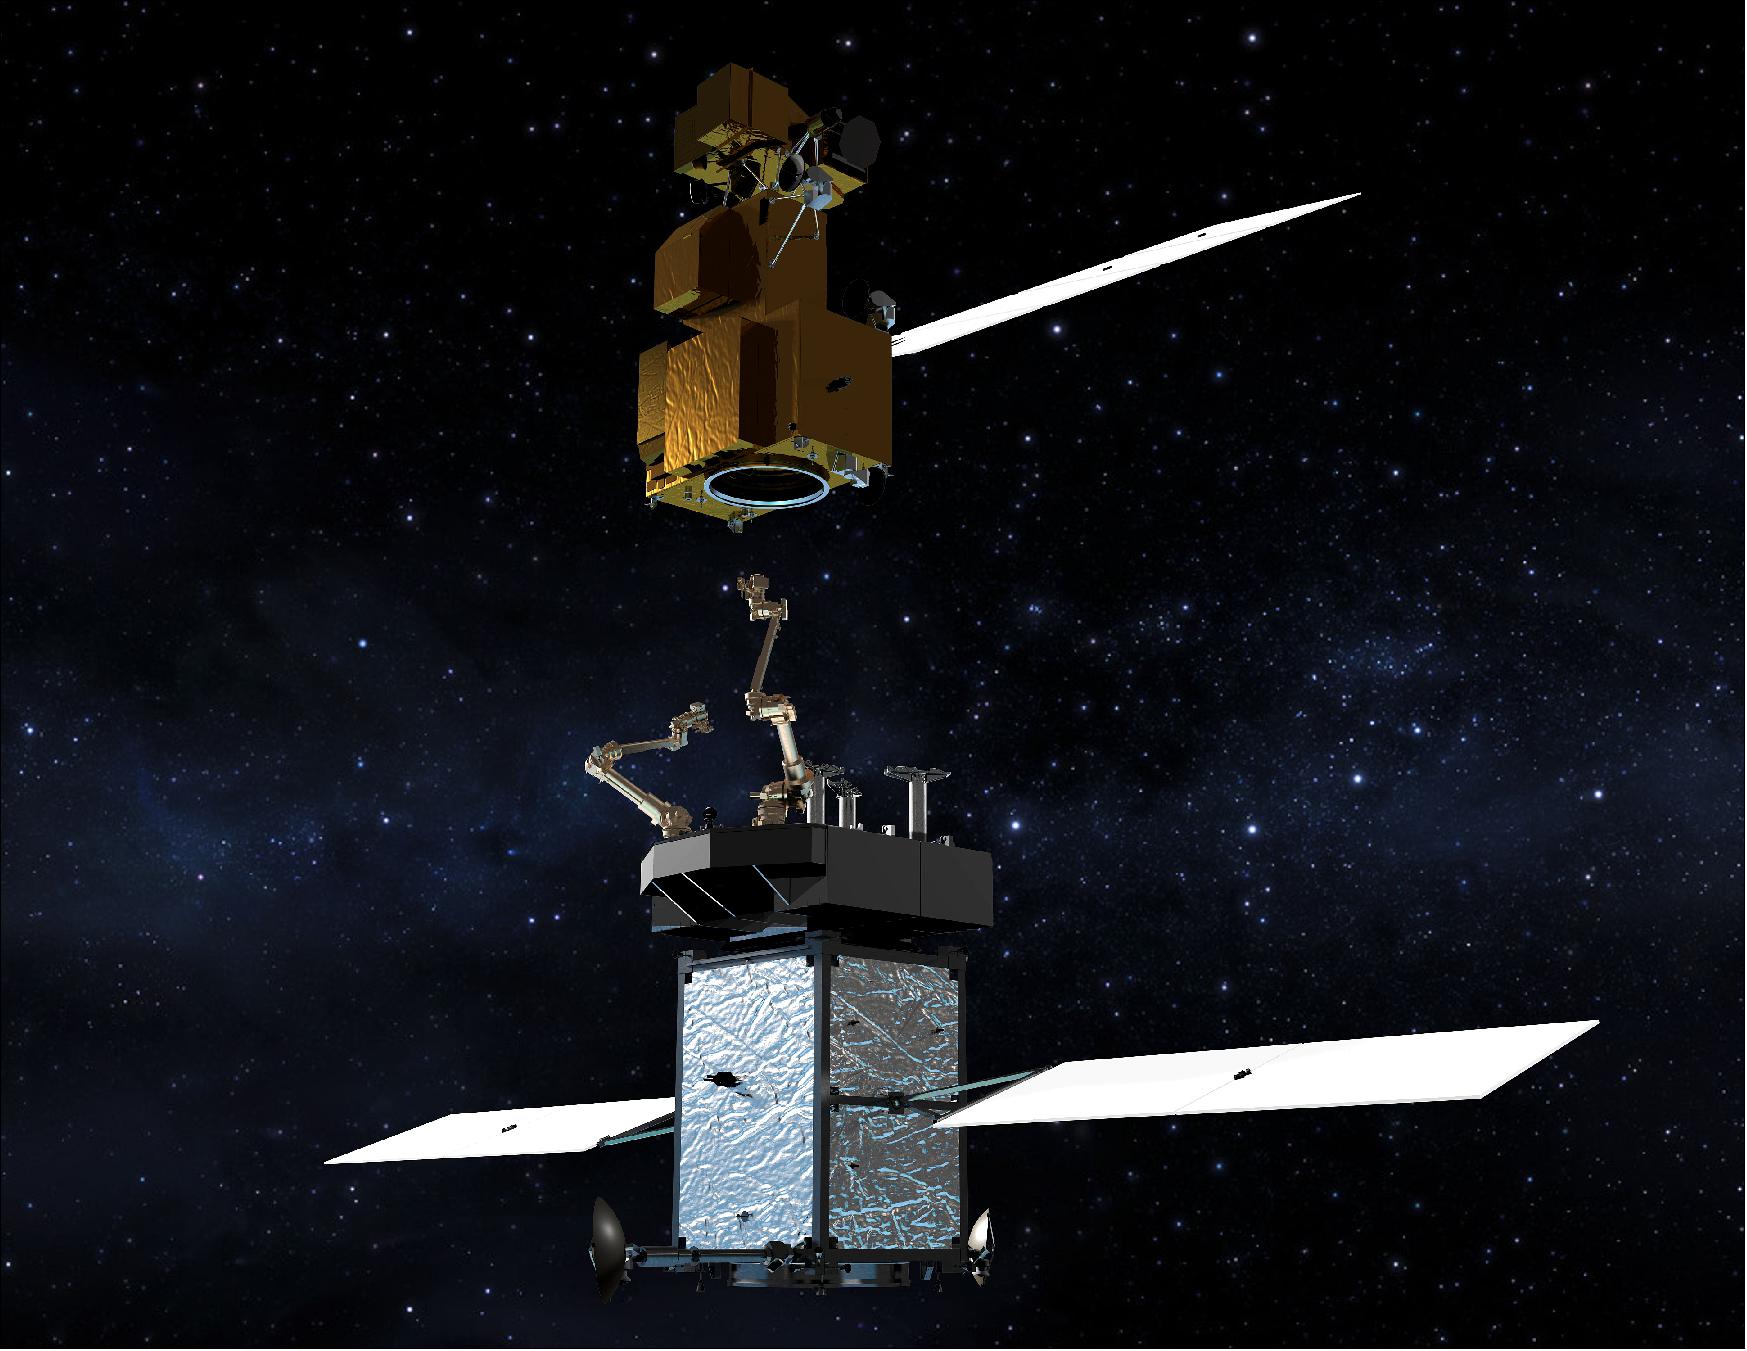 Figure 53: Artist's rendering of the Restore-L servicer extending its robotic arm to grasp and refuel a client satellite on orbit (image credit: NASA)